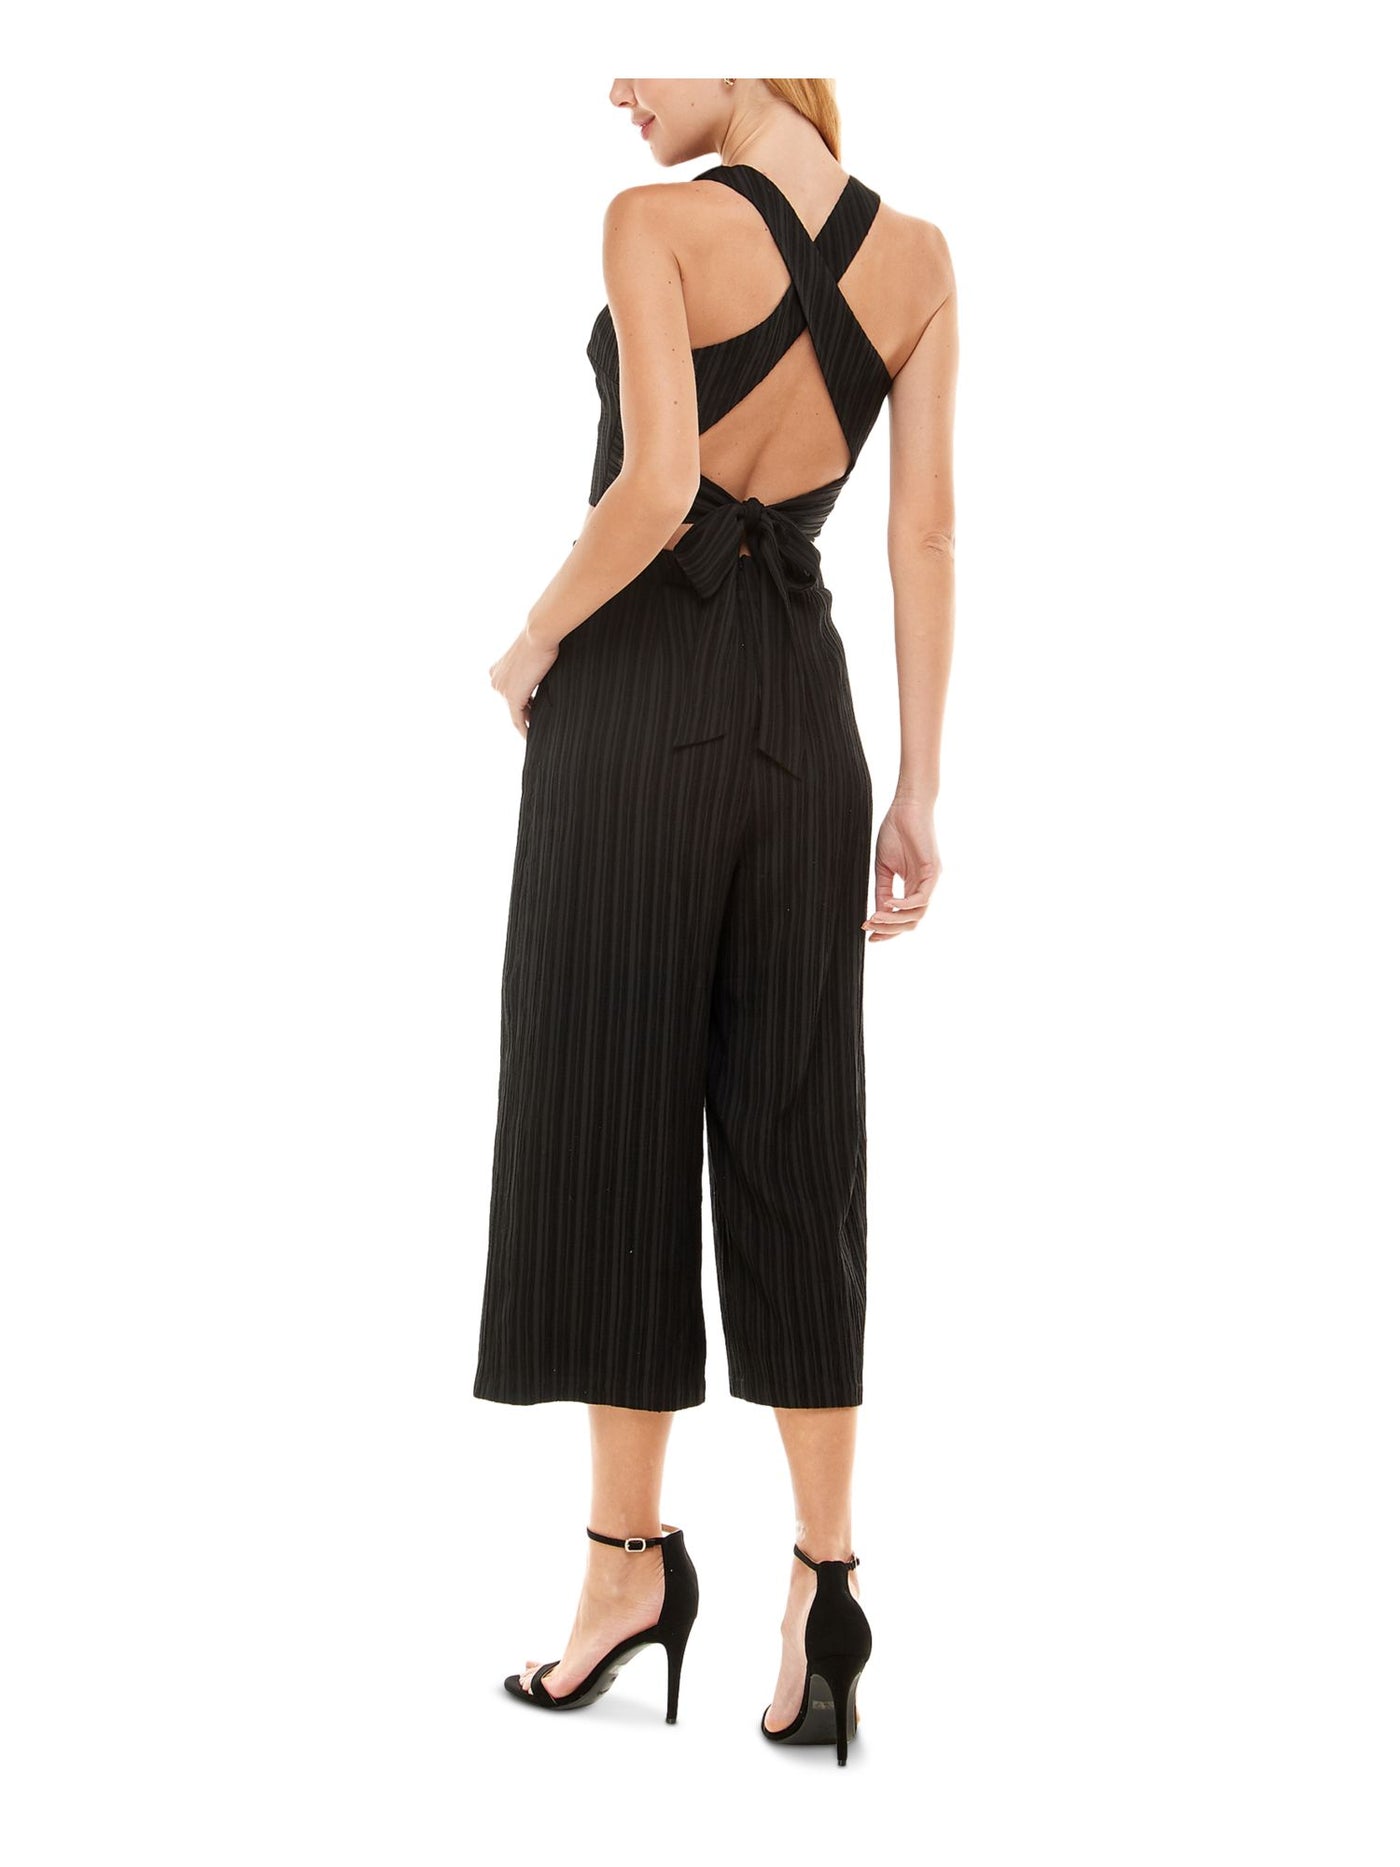 CITY STUDIO Womens Stretch Zippered Pocketed Cross Back Tie Back Hook And Eye Sleeveless Scoop Neck Party Crop Top Jumpsuit